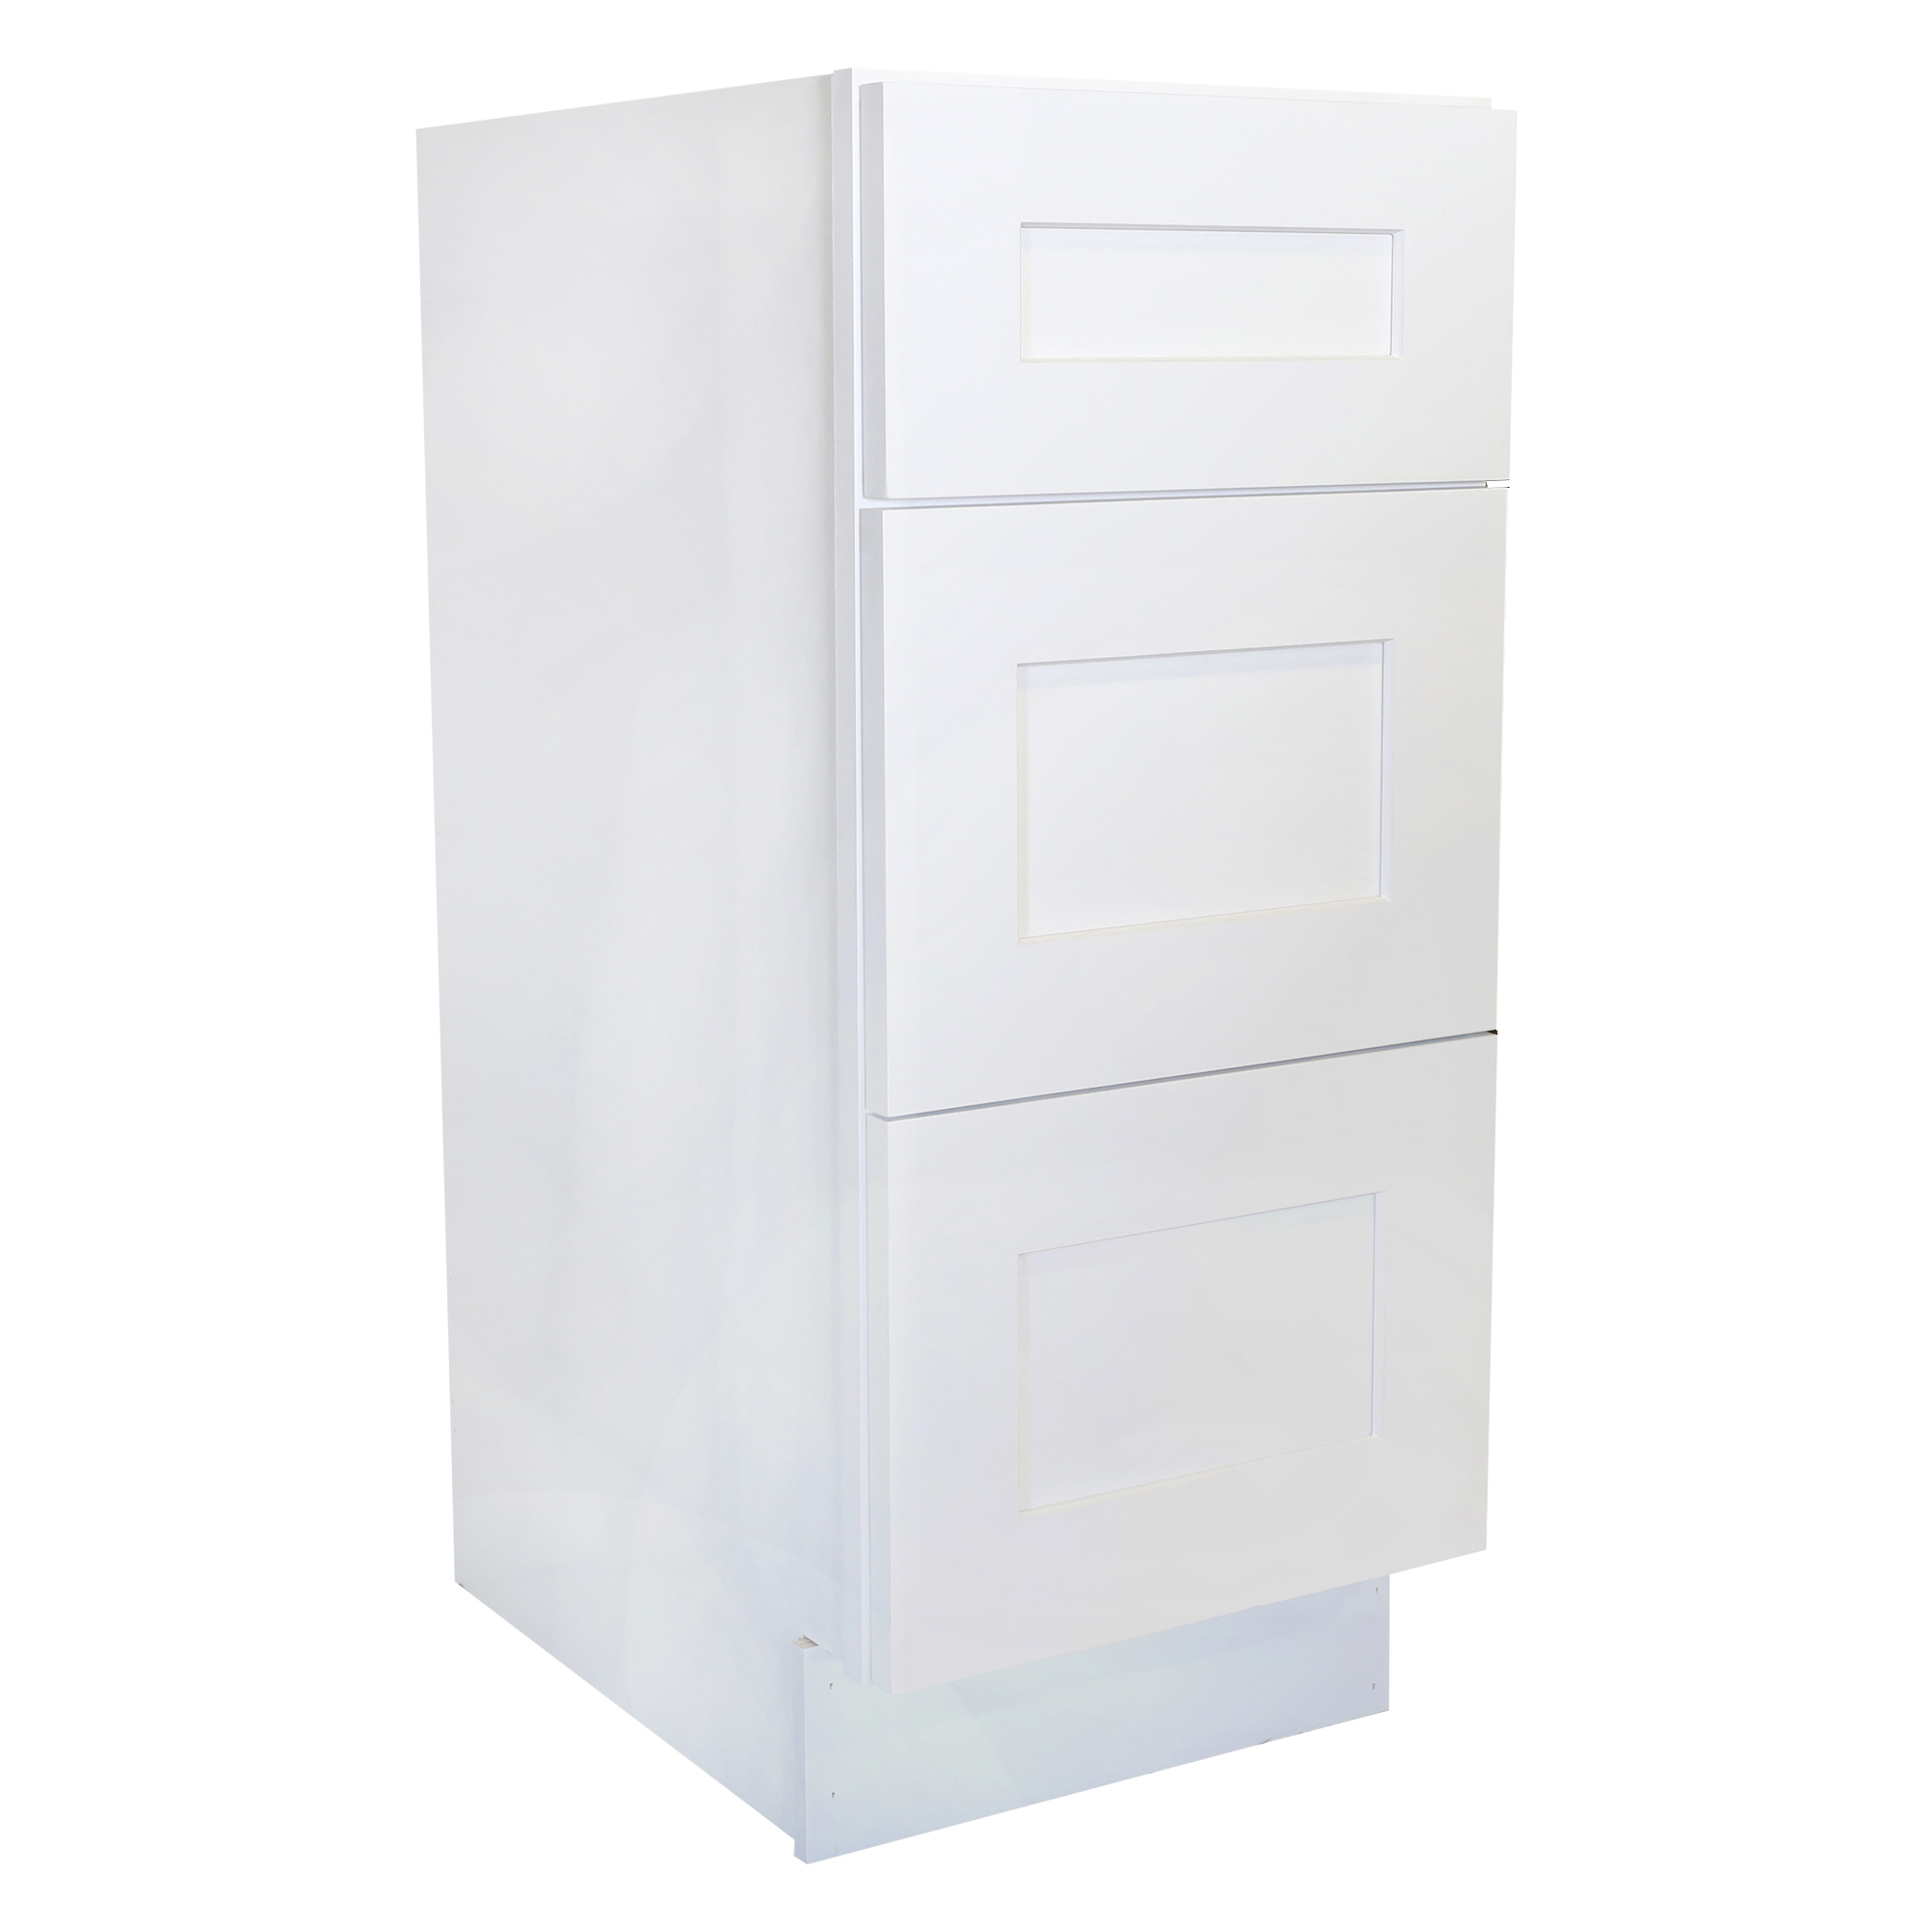 Ready to Assemble 15Wx34.5Hx21D in. Shaker VANITY DRAWER BASE-3 DRAWERS in White